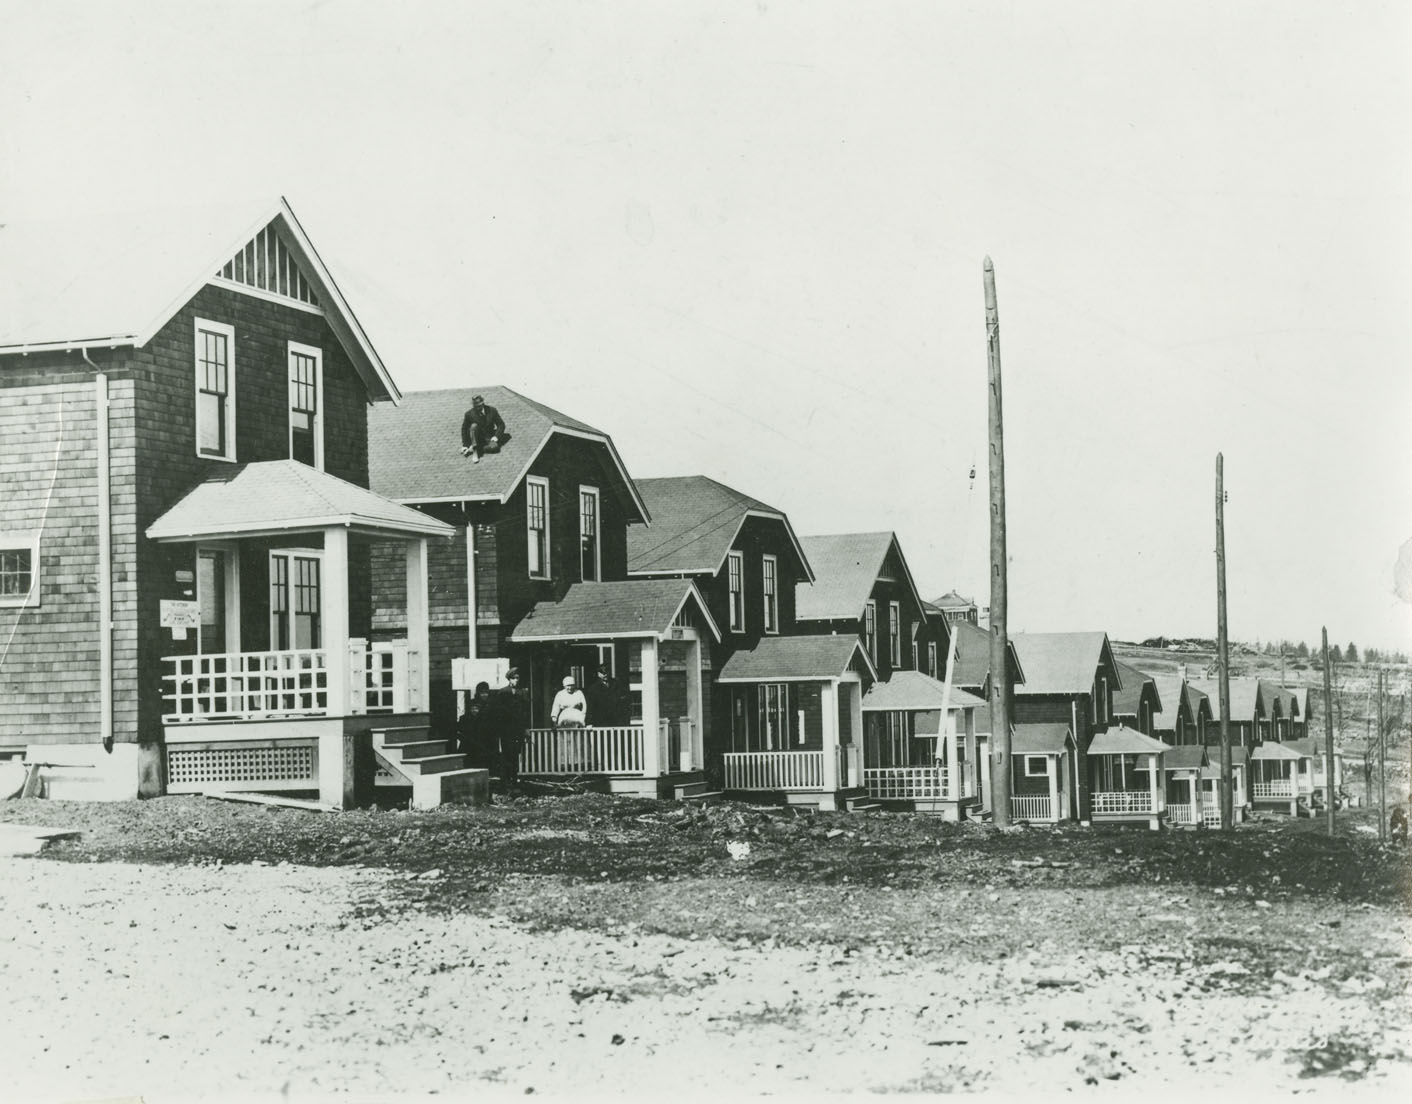 In 1919, the Provincial Legislature passed the Nova Scotia Housing Act which provided for the incorporation of housing companies and the erection of dwelling houses.  Federal money was made available to the provinces at the rate of five per cent per annum for twenty years.  Halifax City Council subsequently passed a by-law which established a Housing Commission to execute the provisions of this act.  The Housing Commission obtained land from the Relief Commission and J.A. Holman Co. Ltd. constructed twenty houses on Albert Street for the Housing Commission during 1920-1921.     The Housing Commission's report in 1923 noted that 